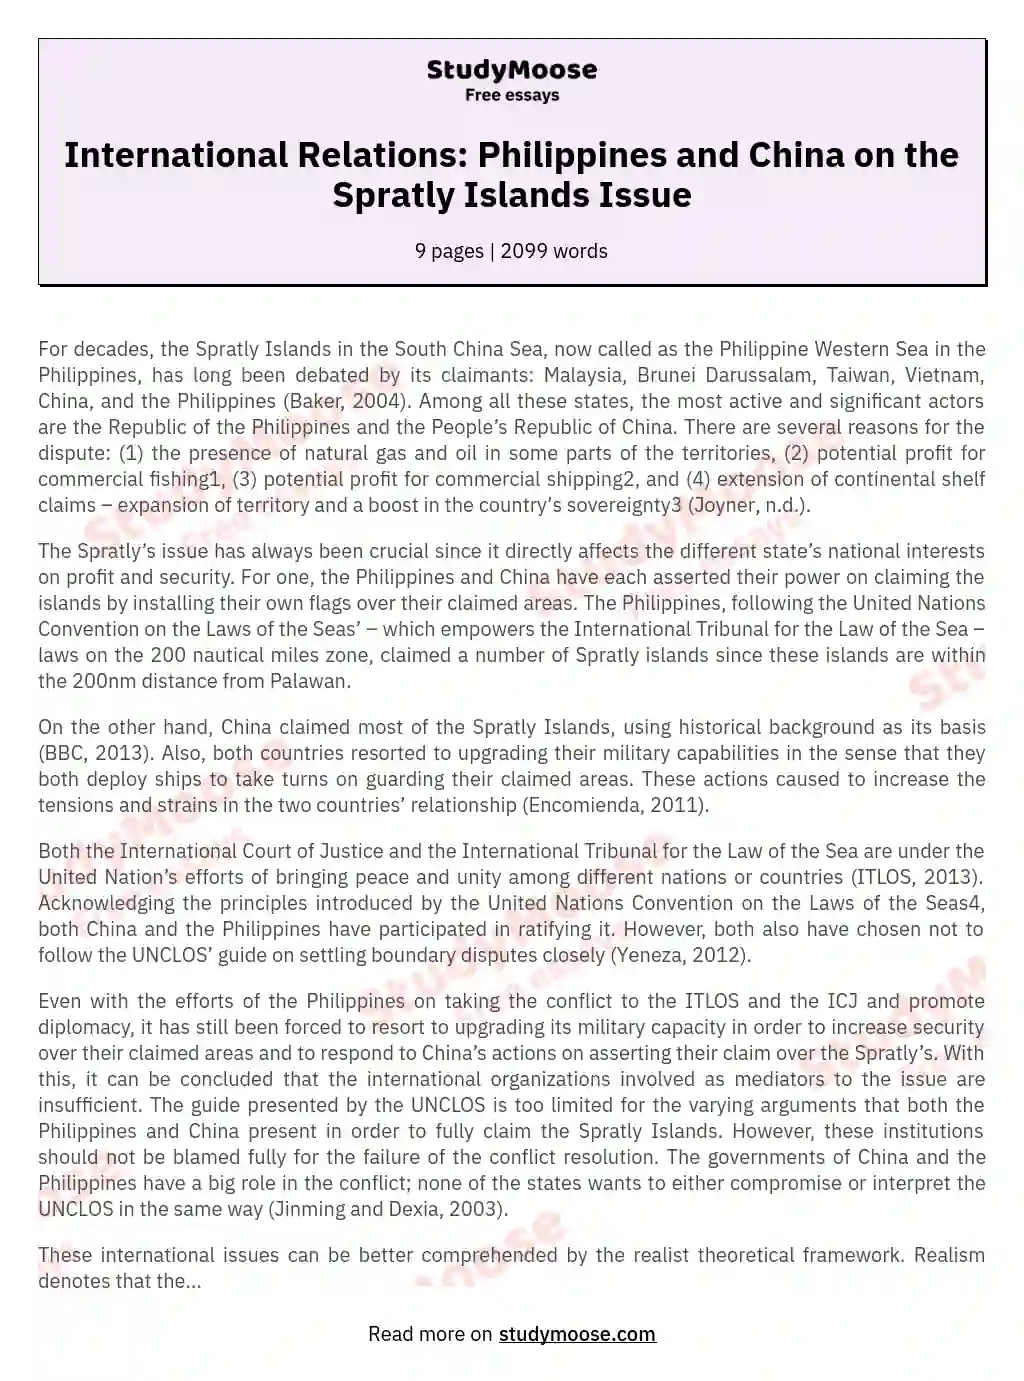 International Relations: Philippines and China on the Spratly Islands Issue essay